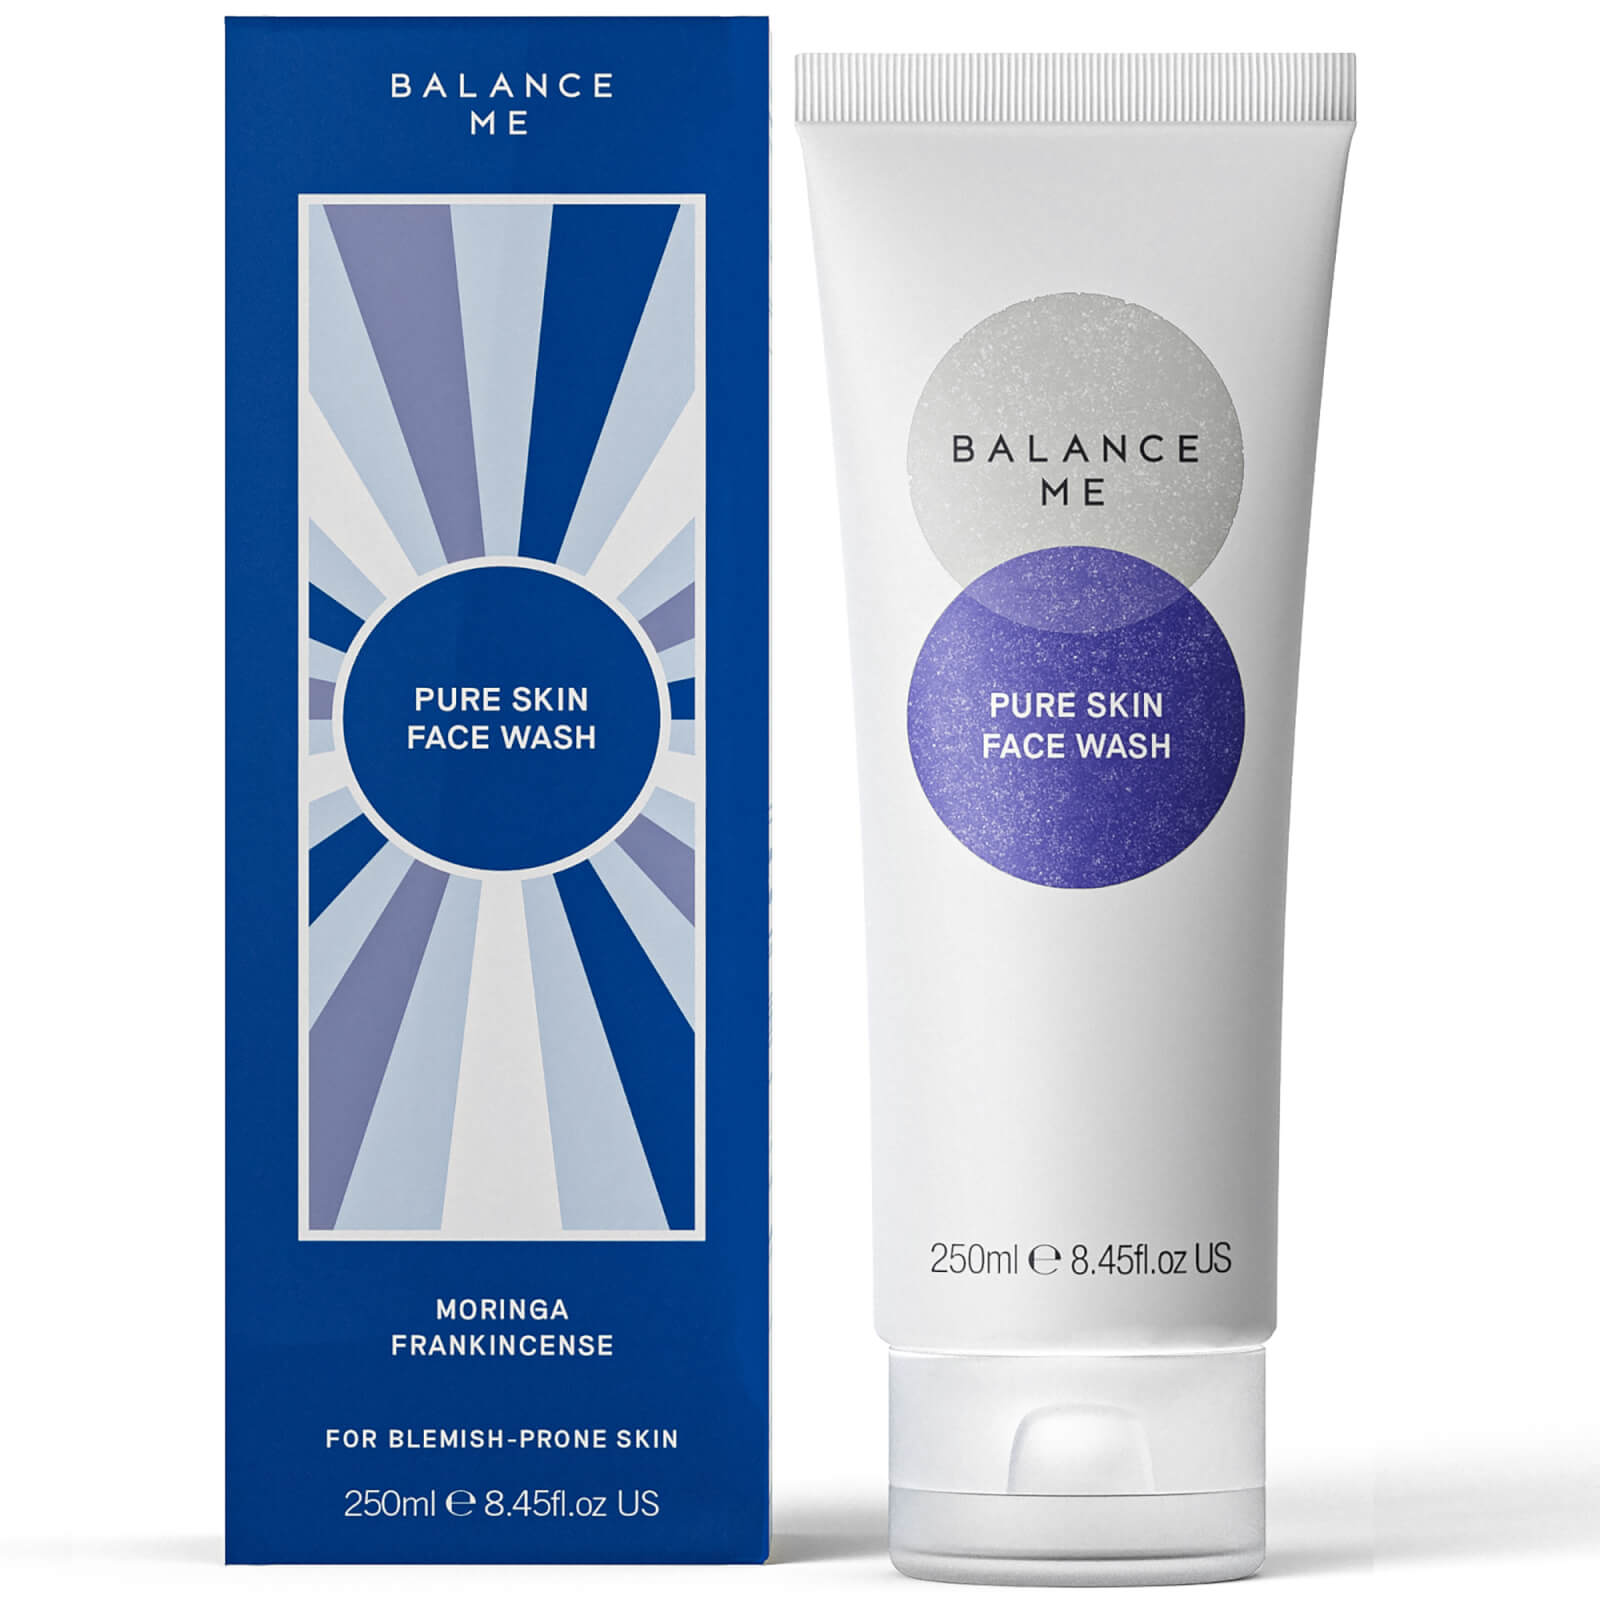 Balance Me Limited Edition Supersize Pure Skin Face Wash 250ml (Worth £36.00)